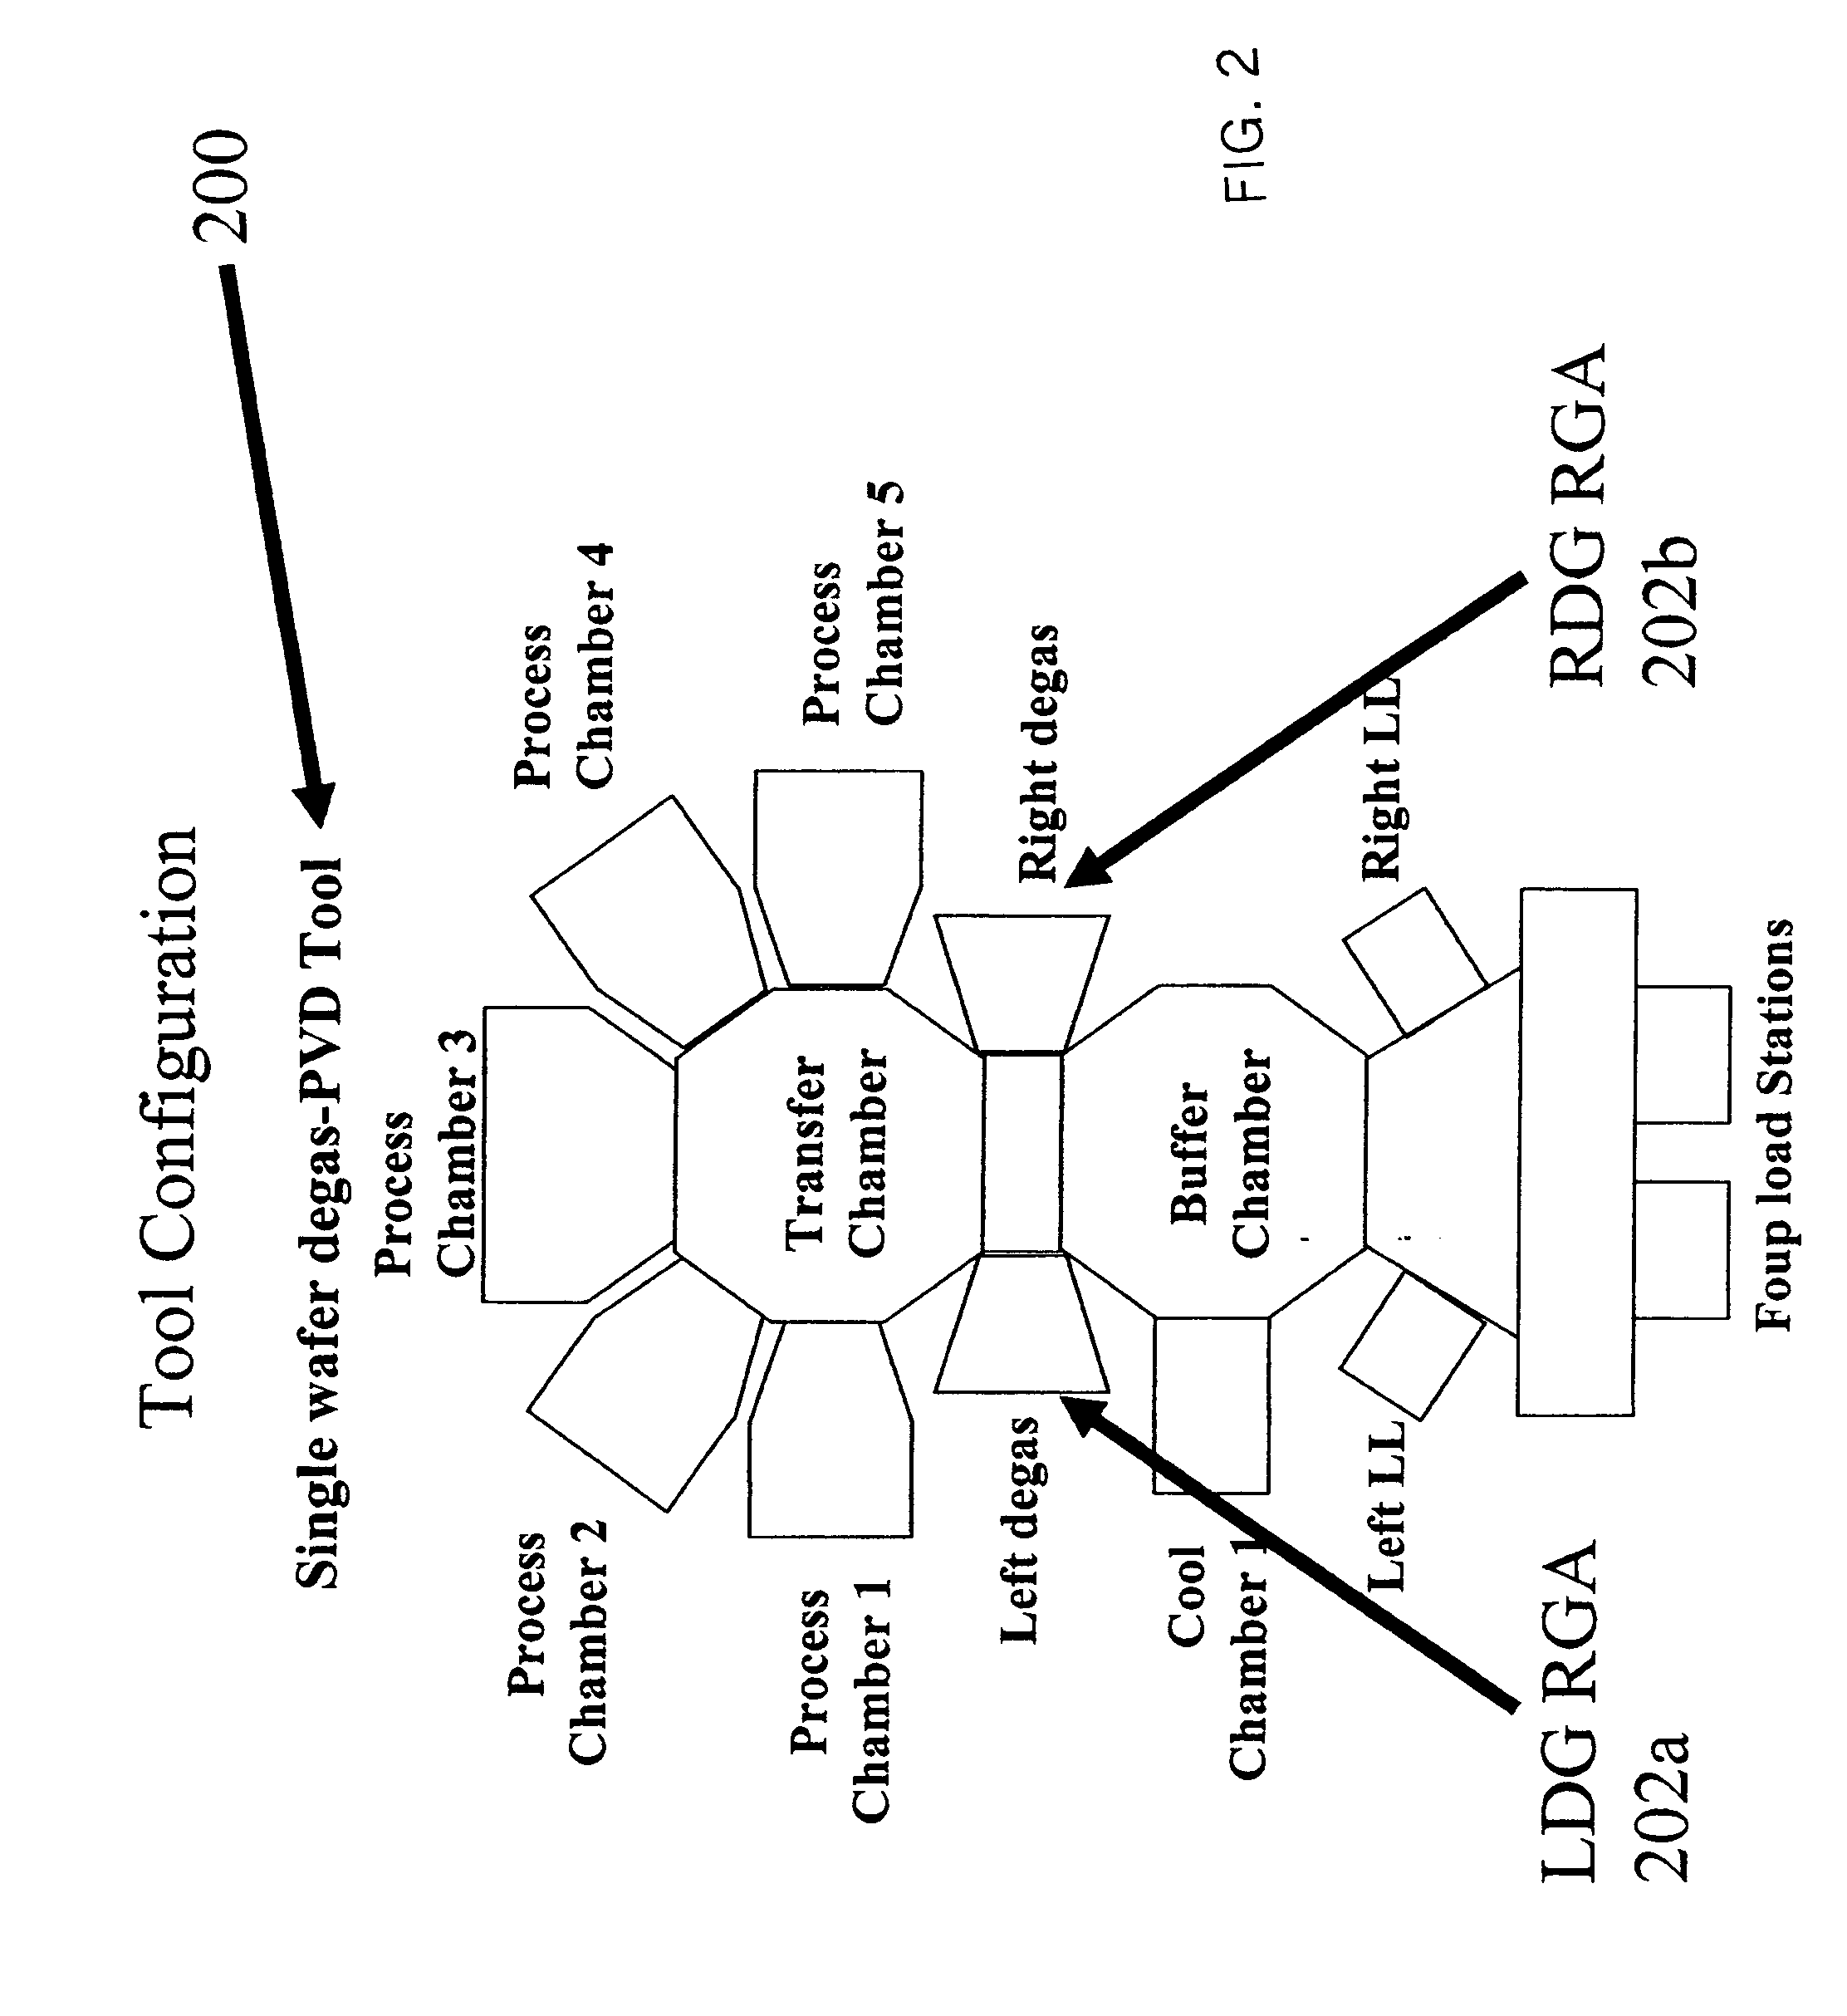 Real time alarm classification and method of use